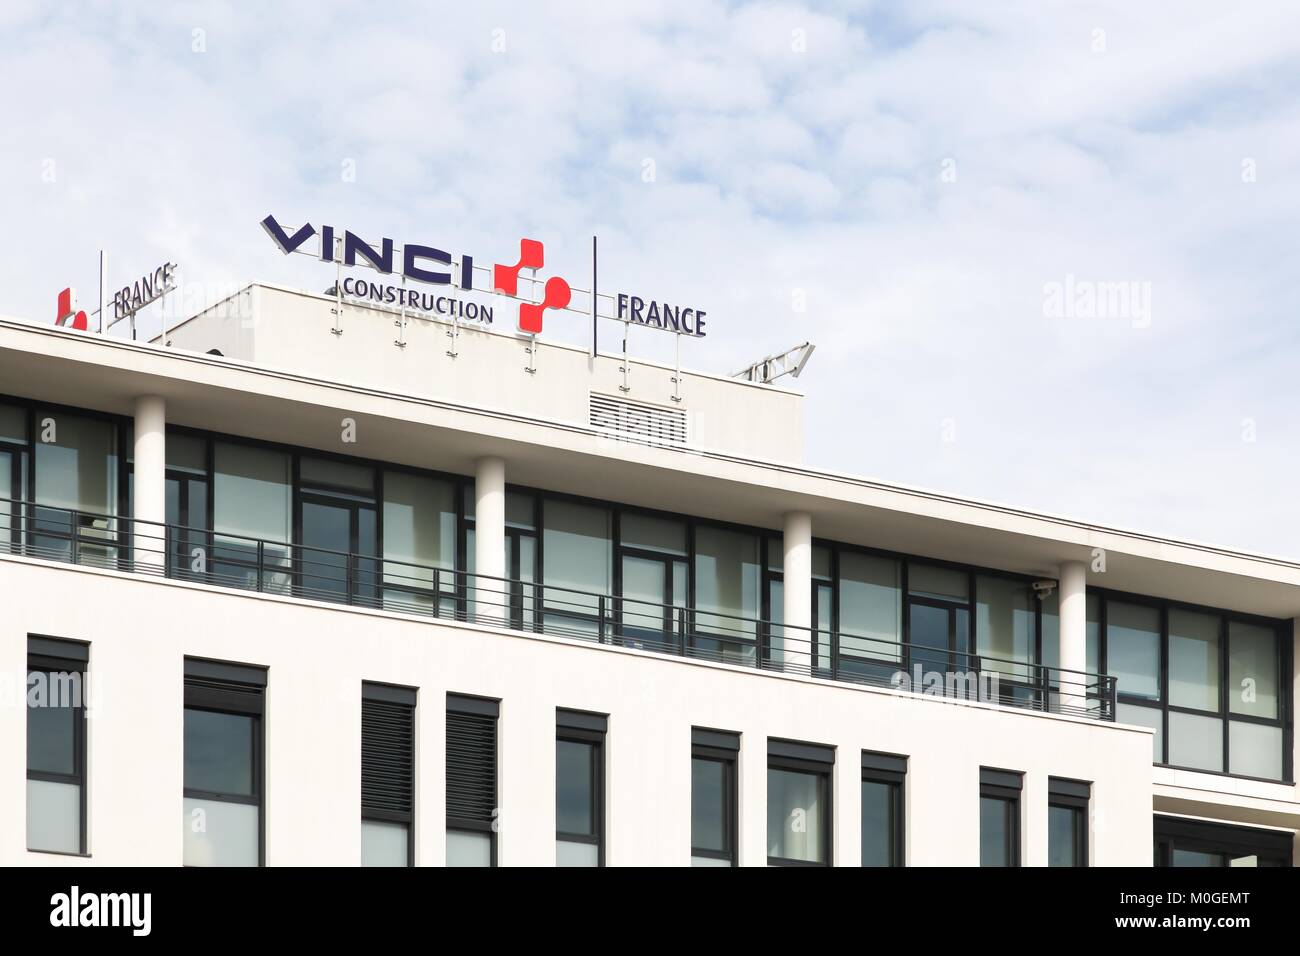 Villeurbanne, France - February 26, 2017: Vinci construction building and offices. Vinci is a French concessions and construction company Stock Photo